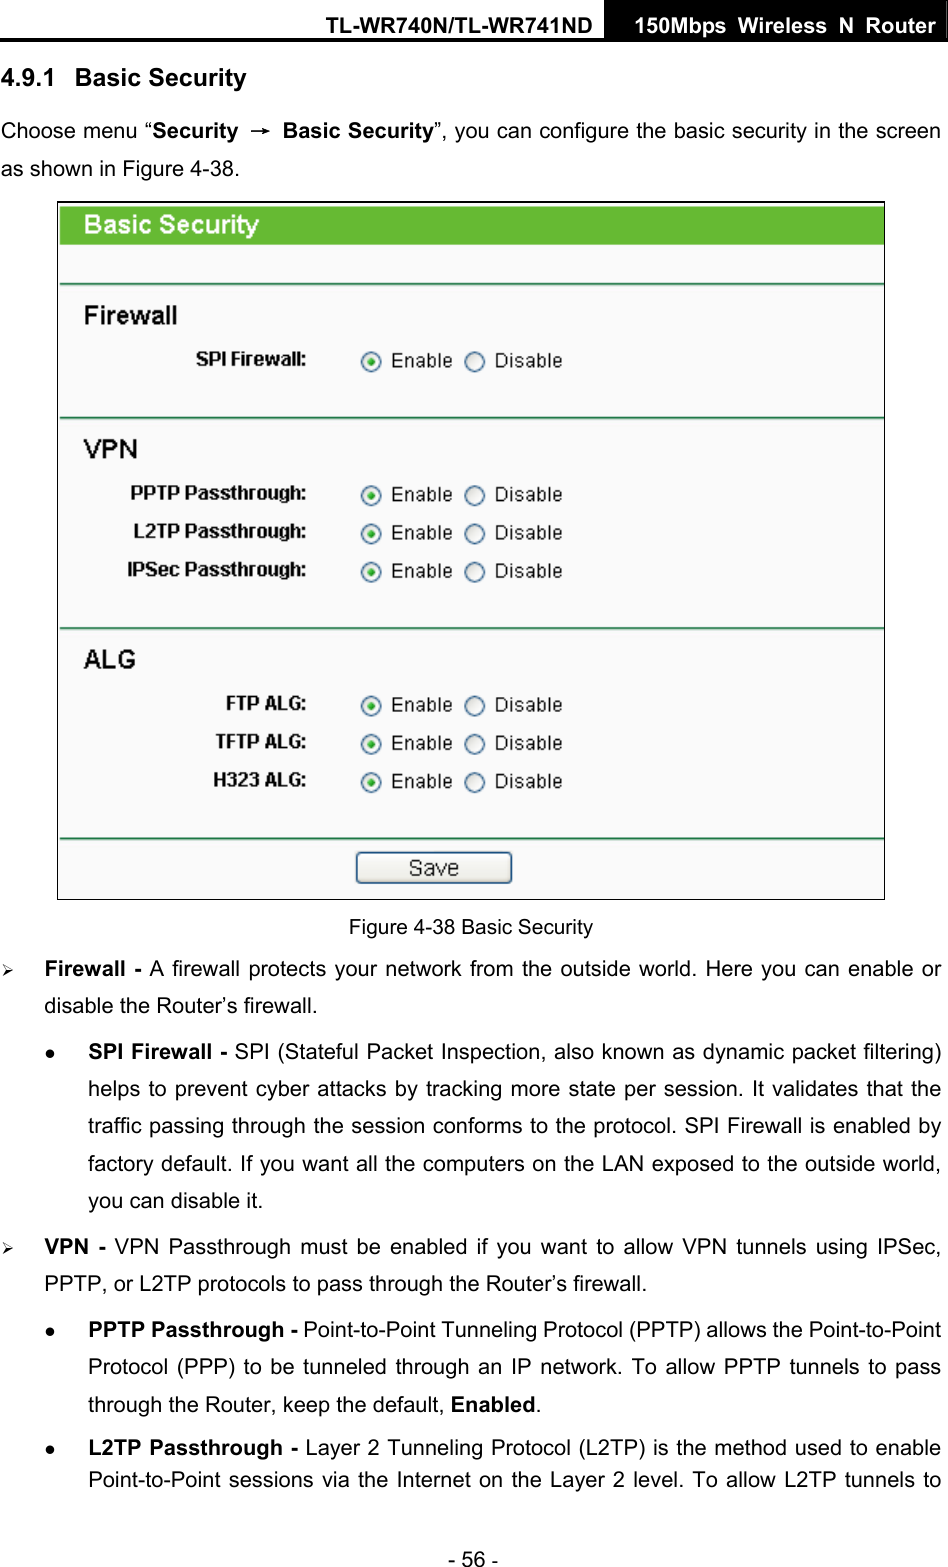 TL-WR740N/TL-WR741ND 150Mbps Wireless N Router - 56 - 4.9.1  Basic Security Choose menu “Security  → Basic Security”, you can configure the basic security in the screen as shown in Figure 4-38.  Figure 4-38 Basic Security ¾ Firewall - A firewall protects your network from the outside world. Here you can enable or disable the Router’s firewall. z SPI Firewall - SPI (Stateful Packet Inspection, also known as dynamic packet filtering) helps to prevent cyber attacks by tracking more state per session. It validates that the traffic passing through the session conforms to the protocol. SPI Firewall is enabled by factory default. If you want all the computers on the LAN exposed to the outside world, you can disable it.   ¾ VPN - VPN Passthrough must be enabled if you want to allow VPN tunnels using IPSec, PPTP, or L2TP protocols to pass through the Router’s firewall. z PPTP Passthrough - Point-to-Point Tunneling Protocol (PPTP) allows the Point-to-Point Protocol (PPP) to be tunneled through an IP network. To allow PPTP tunnels to pass through the Router, keep the default, Enabled.  z L2TP Passthrough - Layer 2 Tunneling Protocol (L2TP) is the method used to enable Point-to-Point sessions via the Internet on the Layer 2 level. To allow L2TP tunnels to 